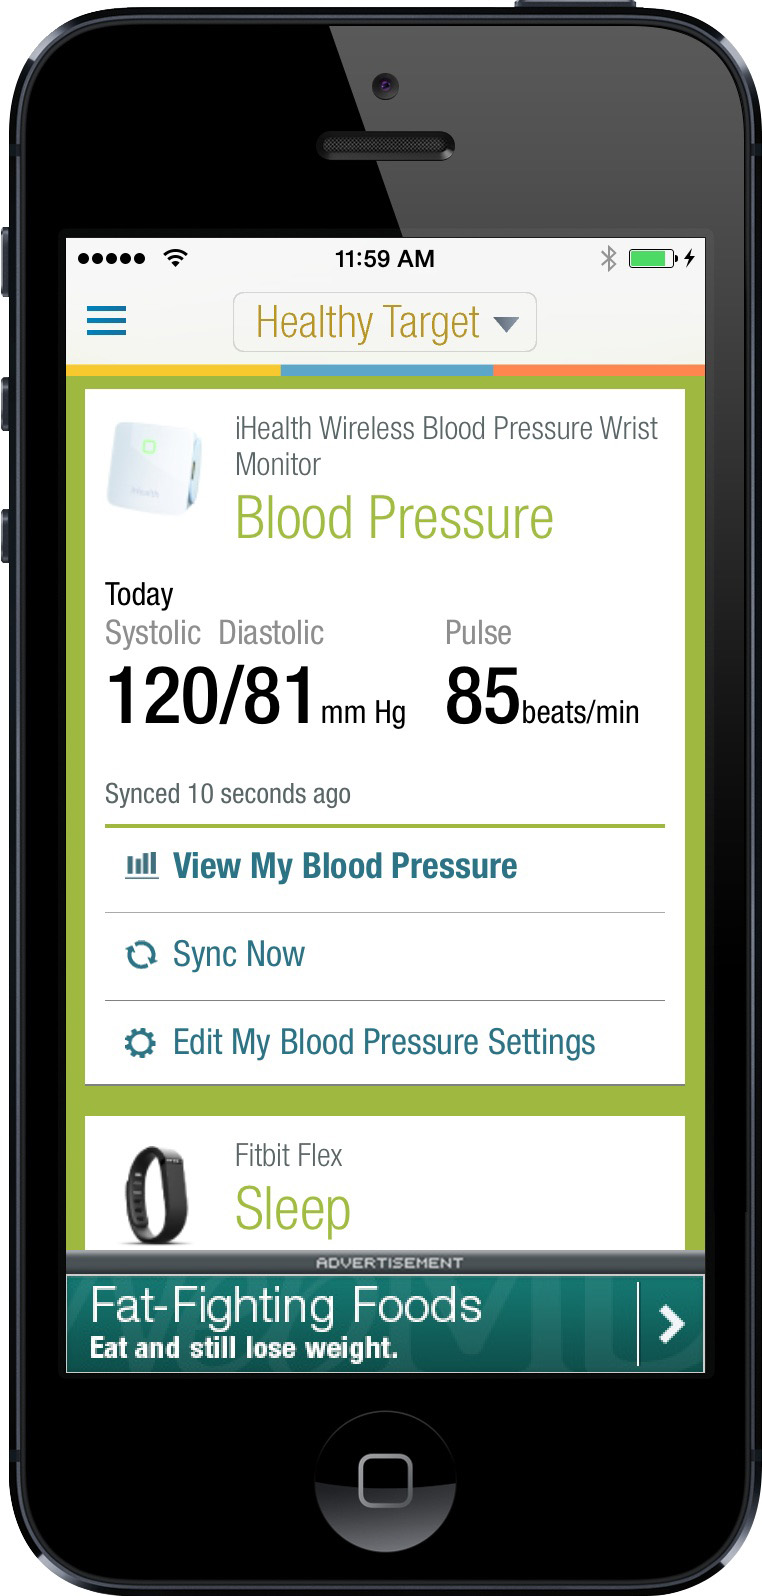 WebMD Healthy Target - My Data (iHealth and Blood Pressure)